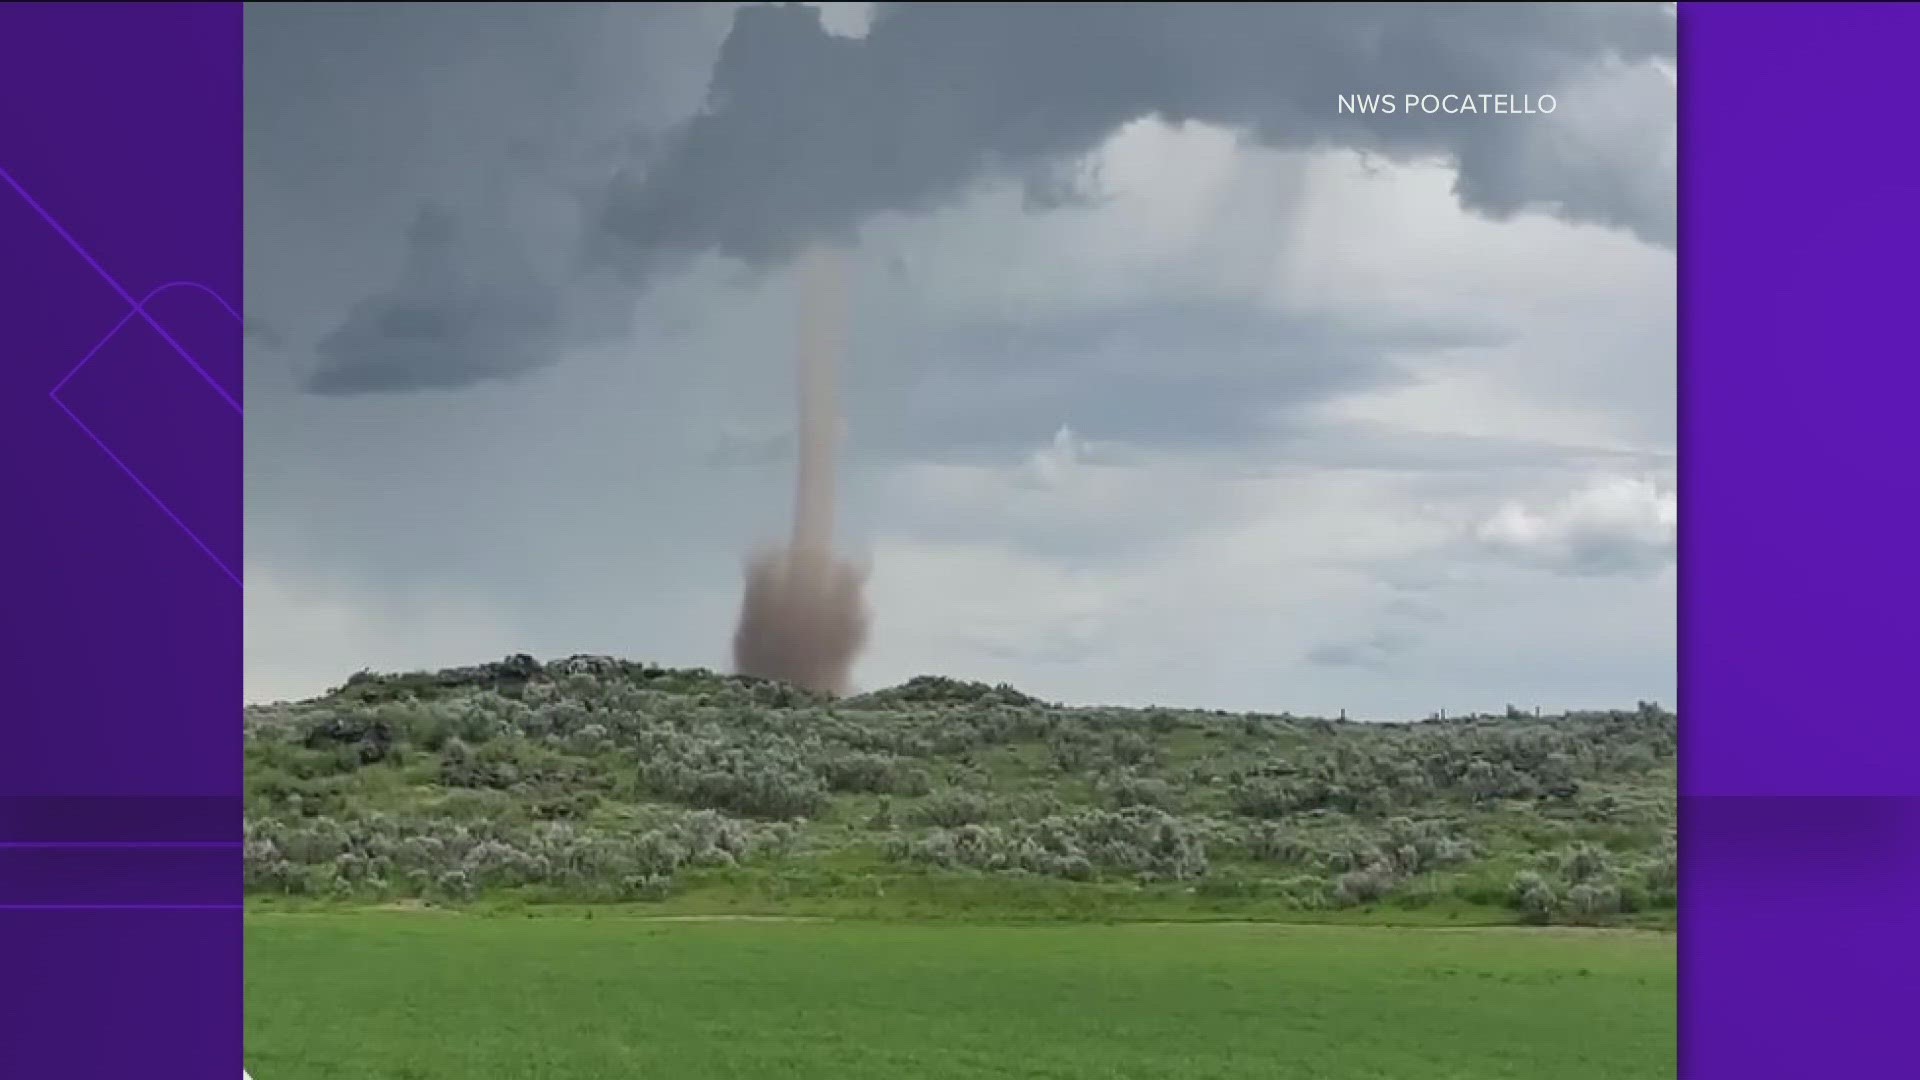 According to the National Weather Service in Pocatello, the tornado touched down in Caribou County on Friday between Soda Springs and Grace.